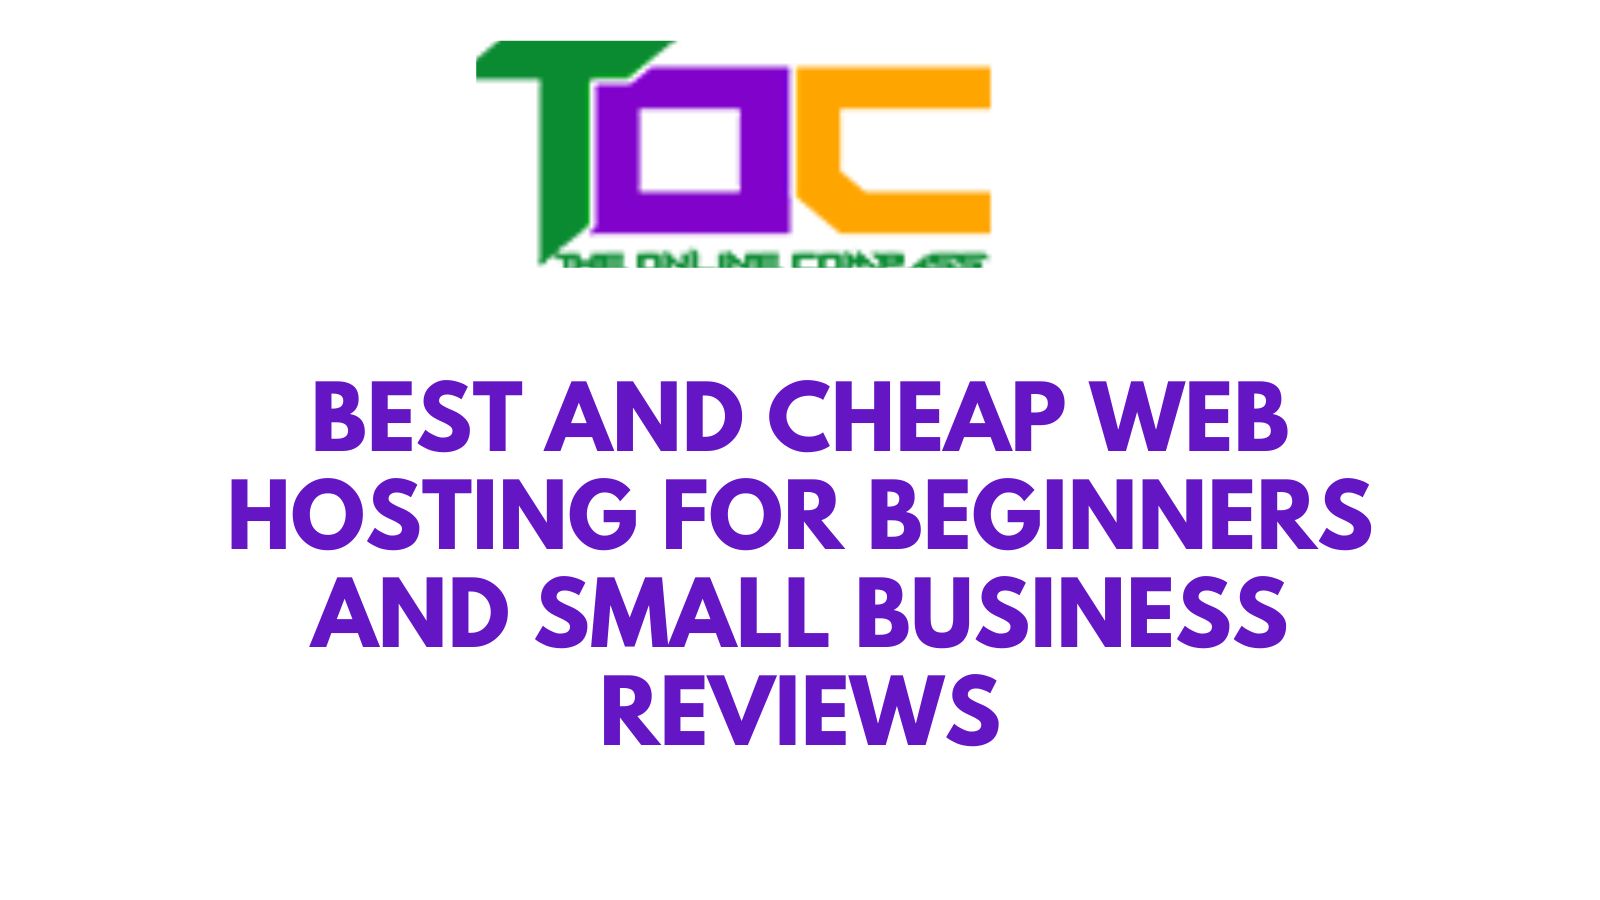 Best and cheap web hosting for beginners and small business reviews